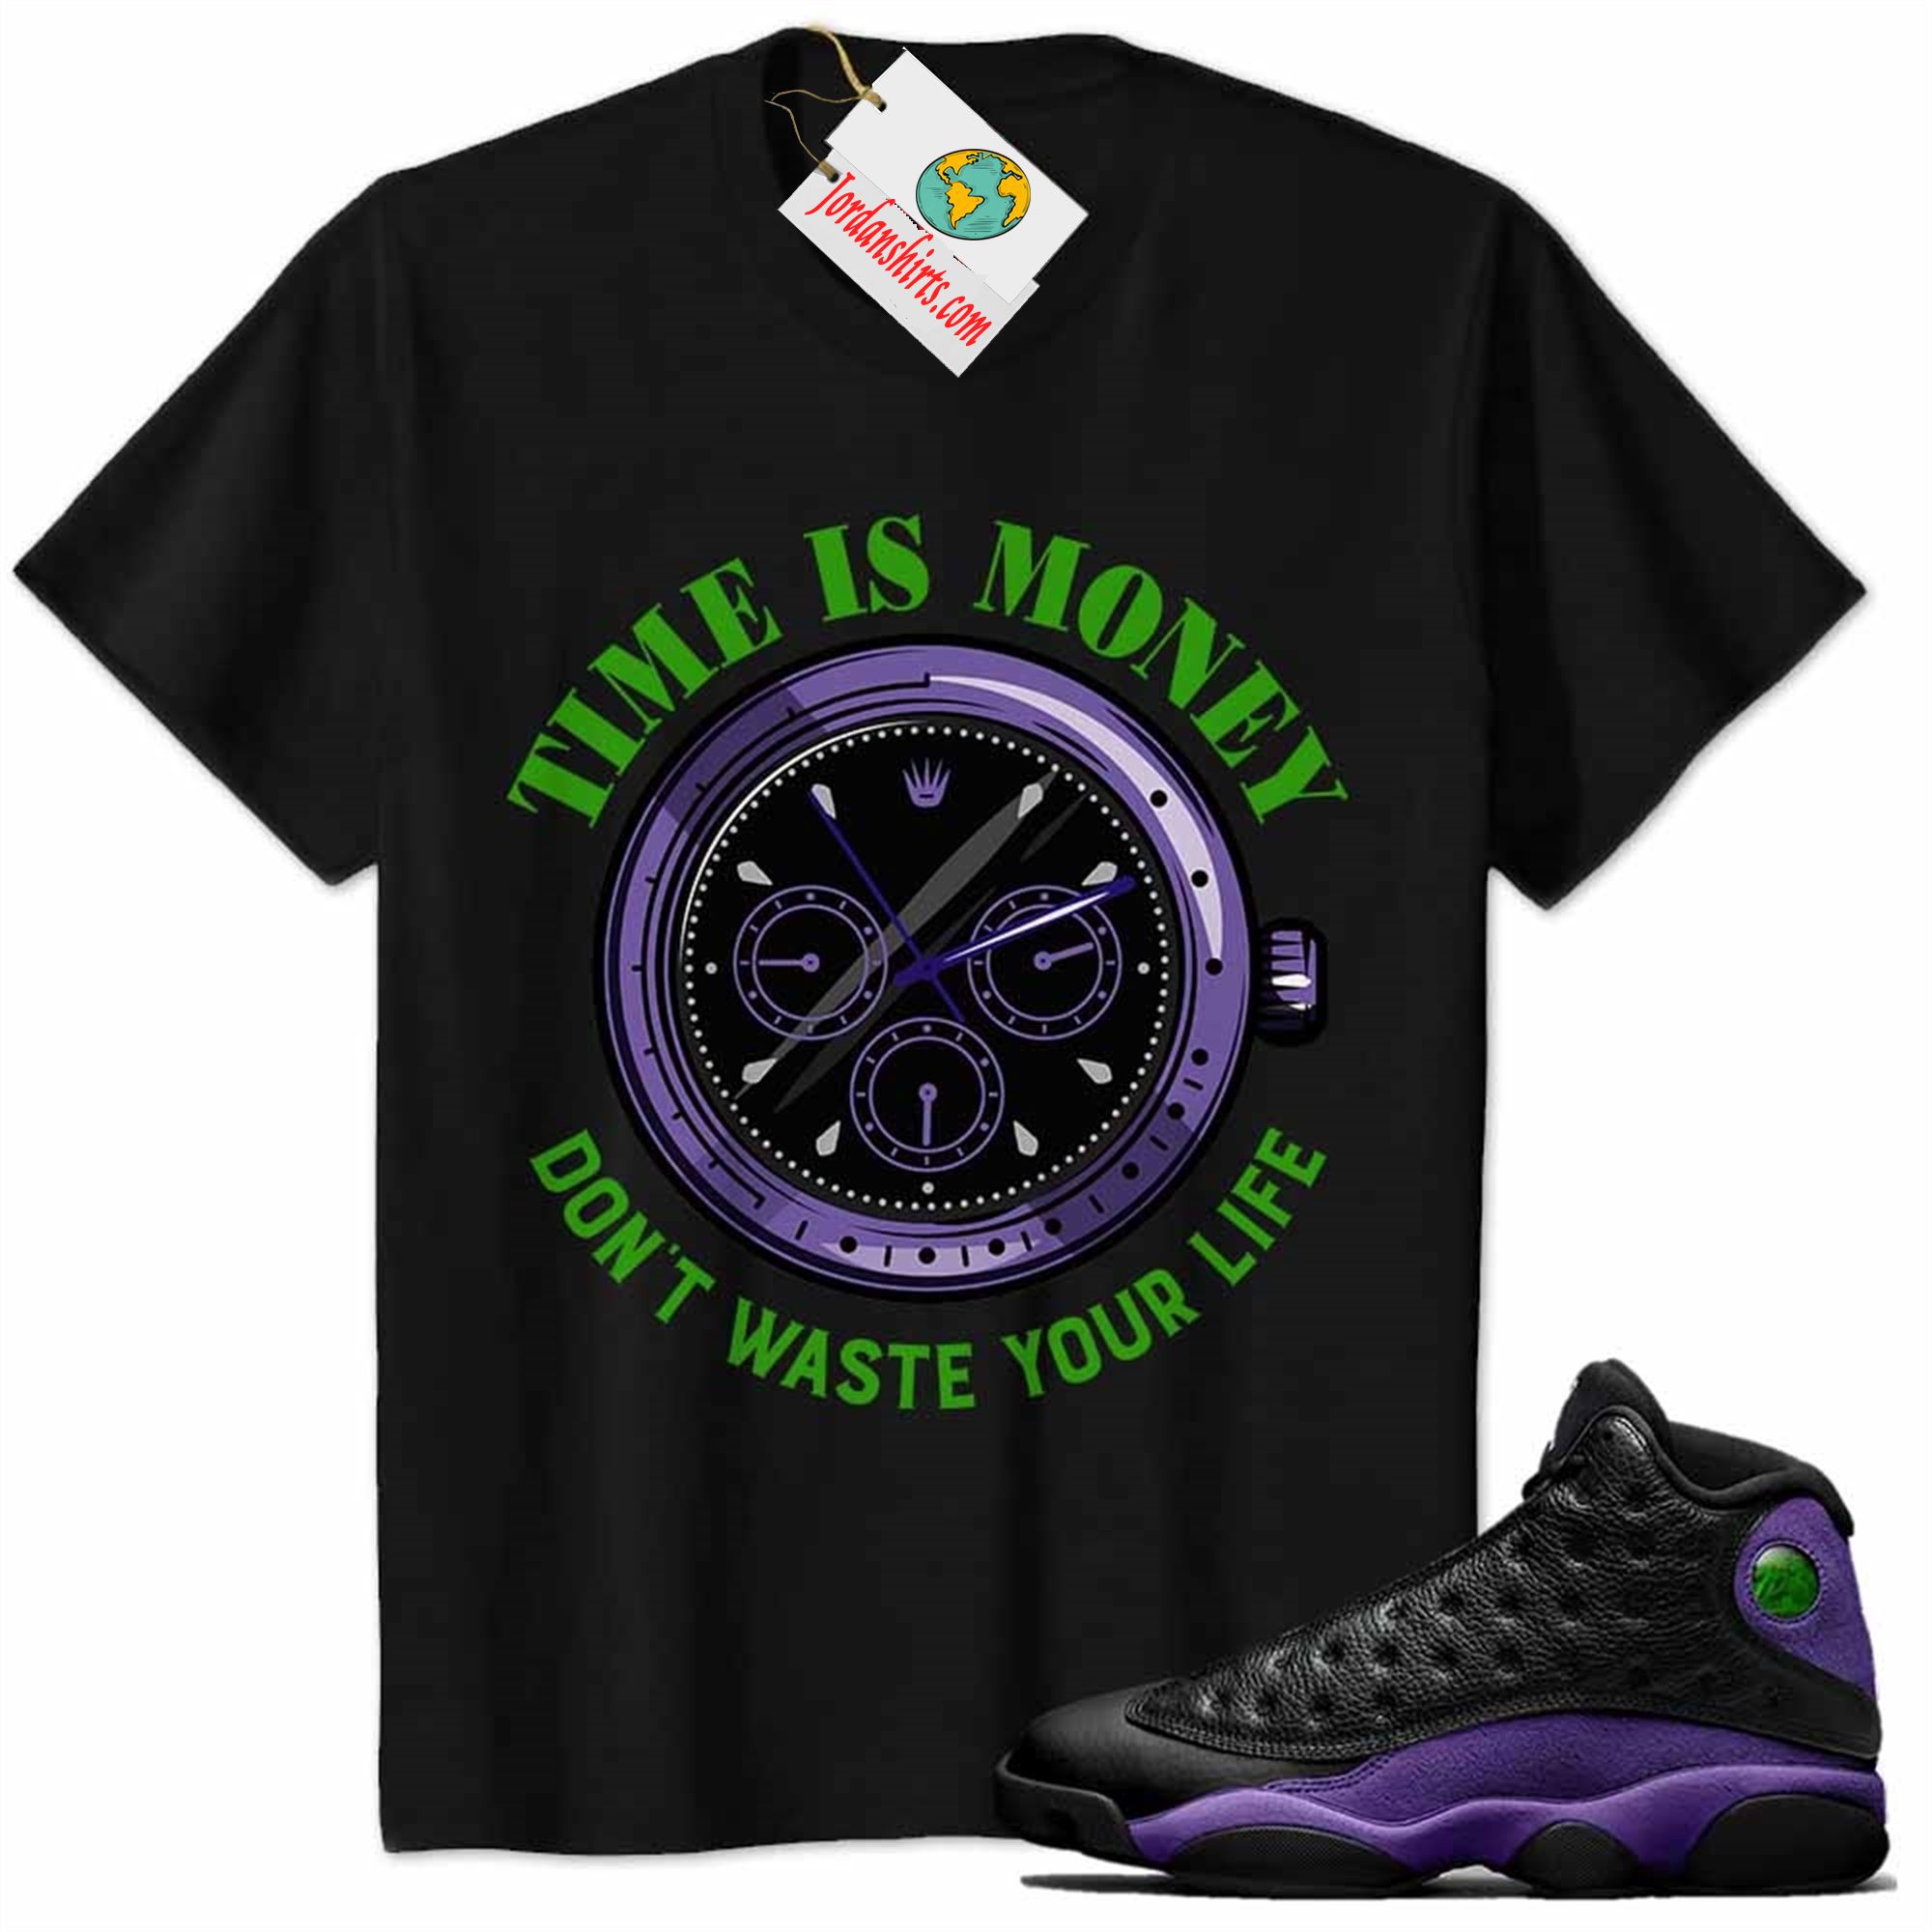 Jordan 13 Shirt, Time Is Money Dont Waste Your Life Black Air Jordan 13 Court Purple 13s Full Size Up To 5xl